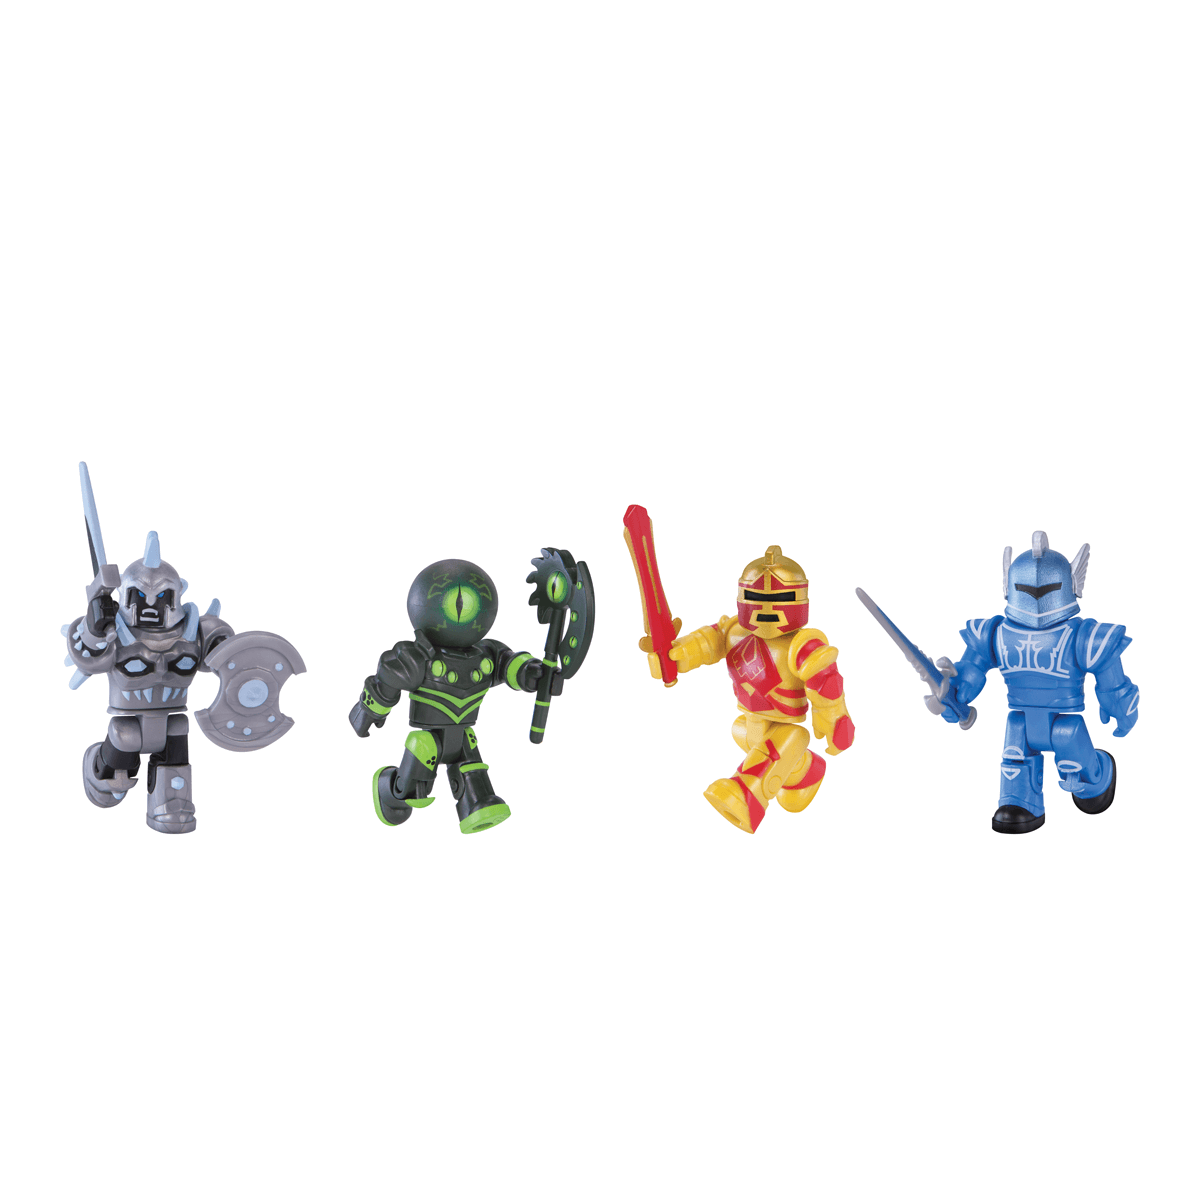 Roblox Champions Of Roblox 4 Pack The Entertainer - roblox champions of roblox six figure pack with exclusive